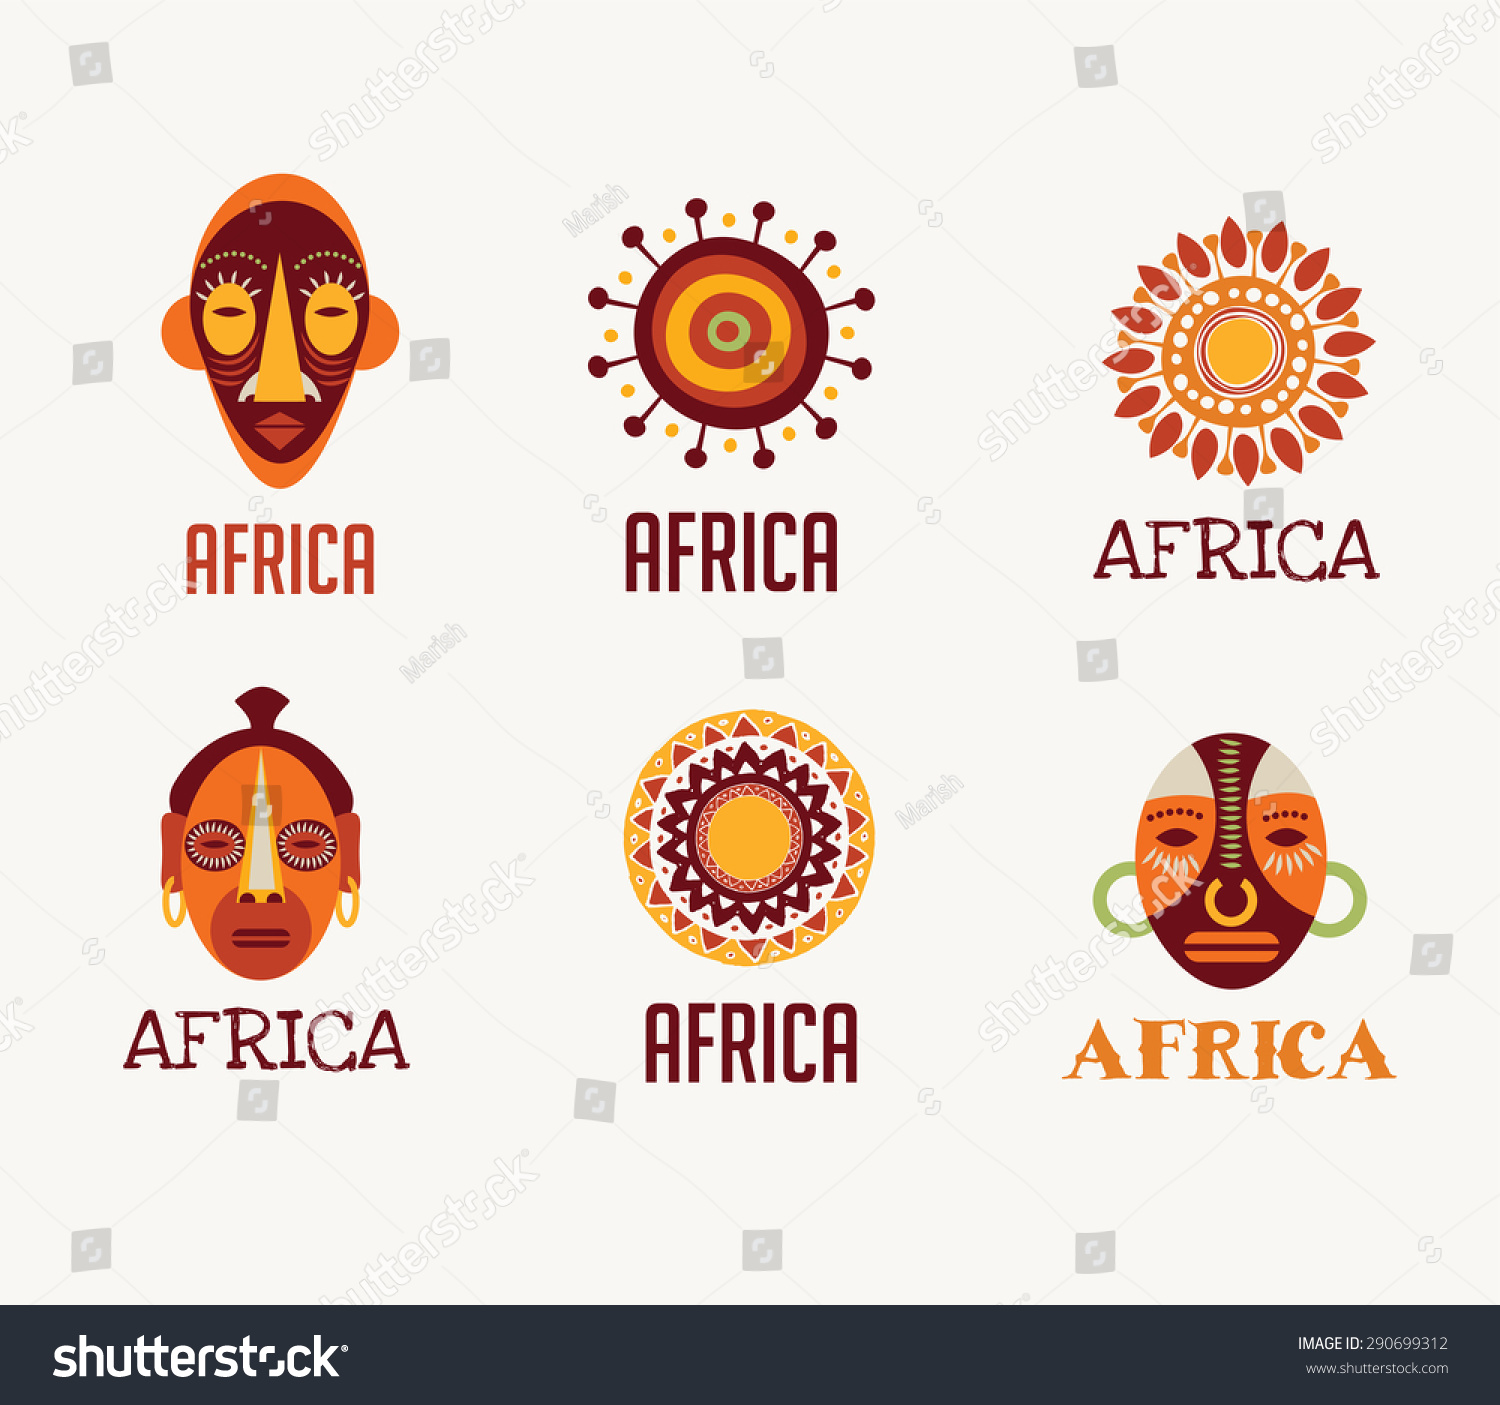 SVG of Africa and Safari elements and icons svg